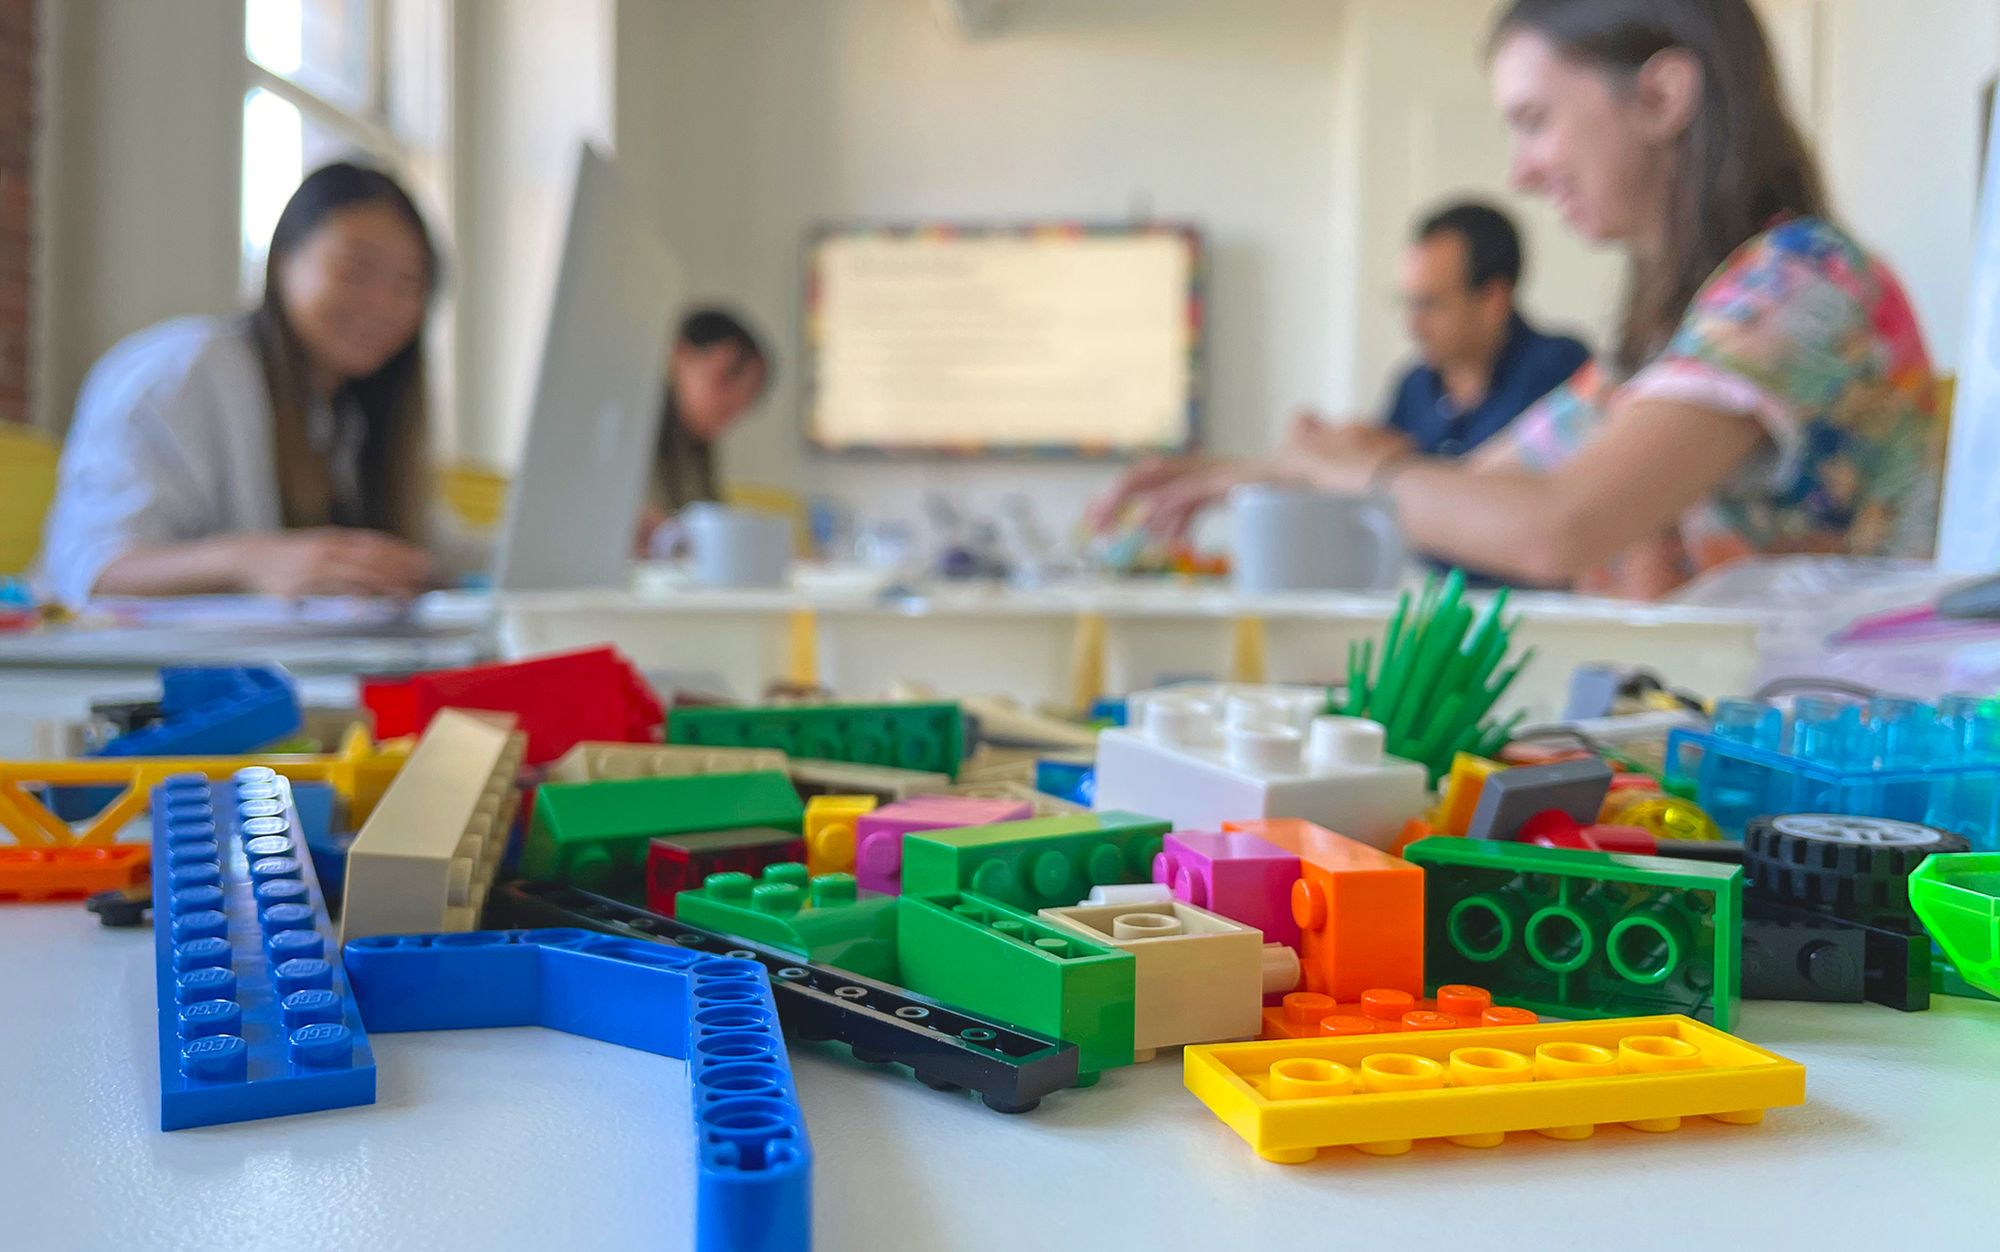 A pile of colourful assorted LEGO bricks scattered on a table in the foreground with four workshop participants blurred in the background building their own models in a boardroom